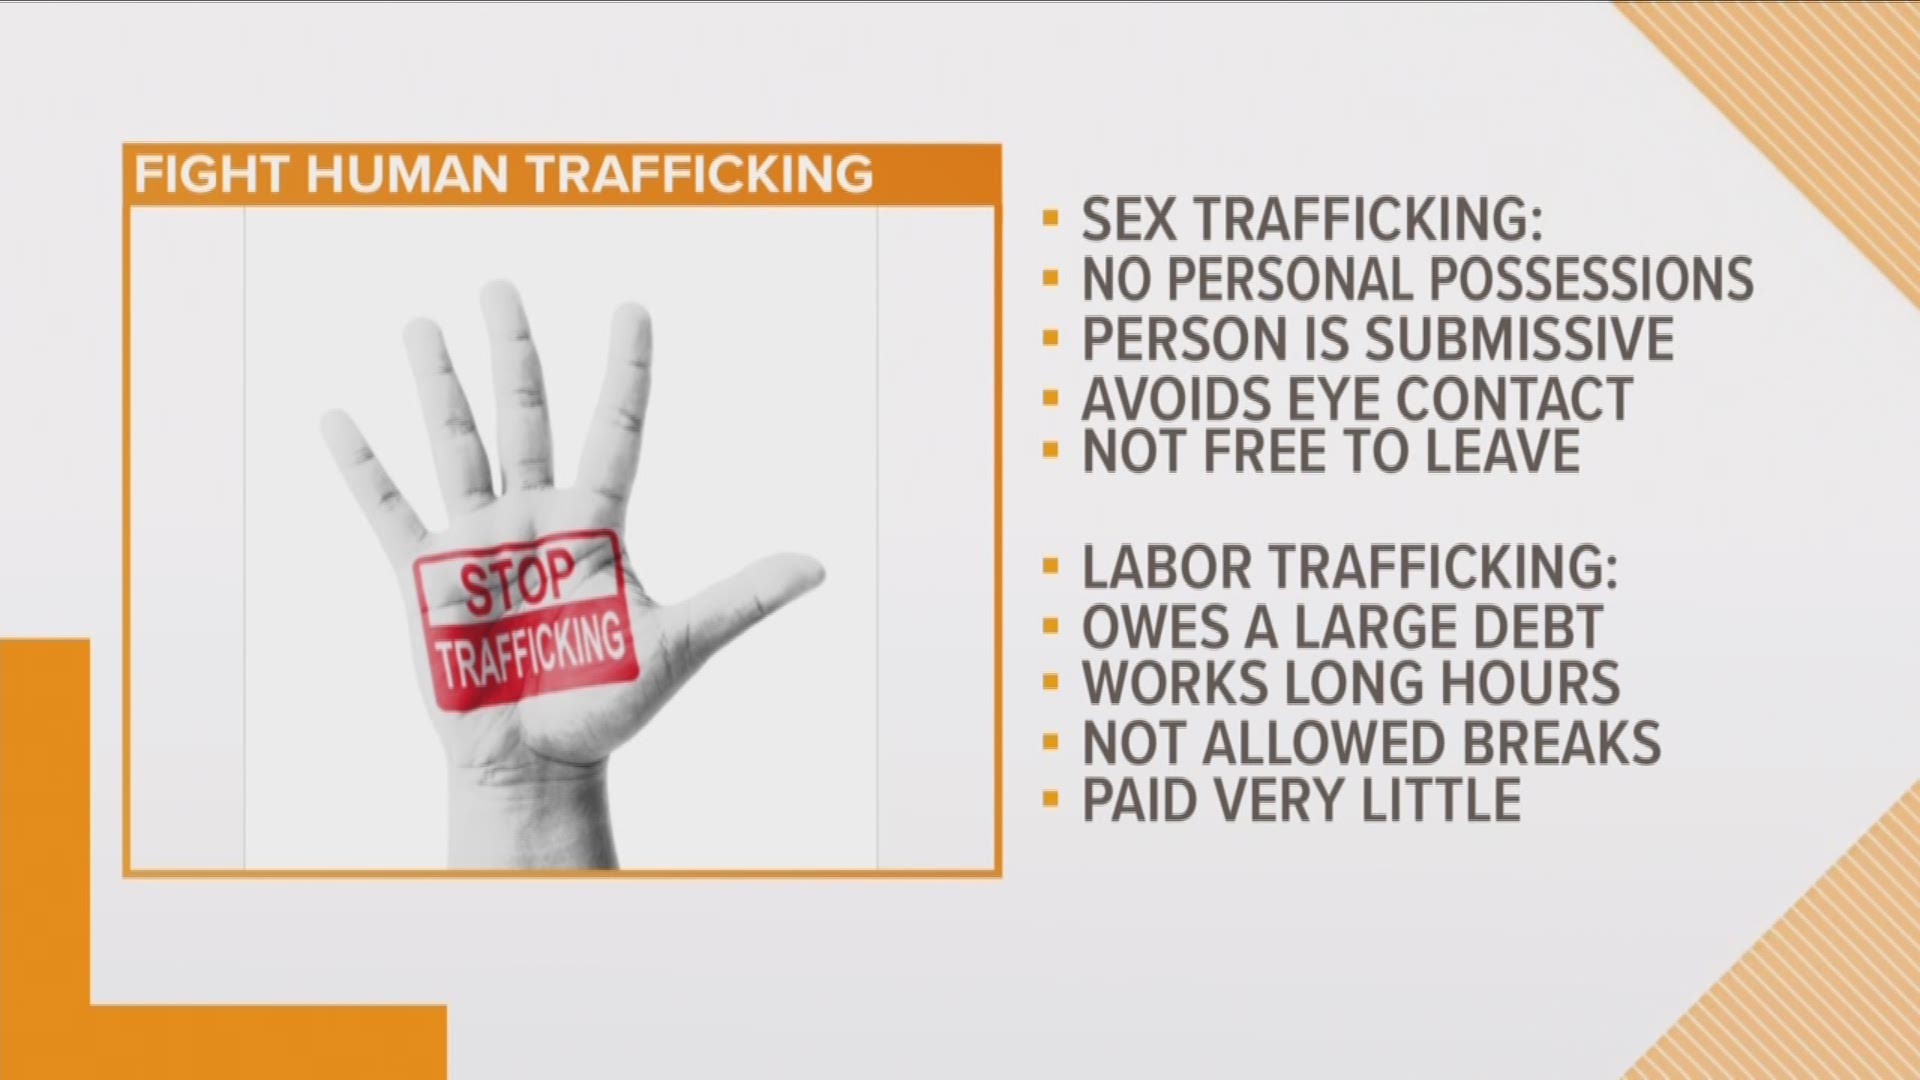 How To Spot, Stop, and Prevent Human Trafficking